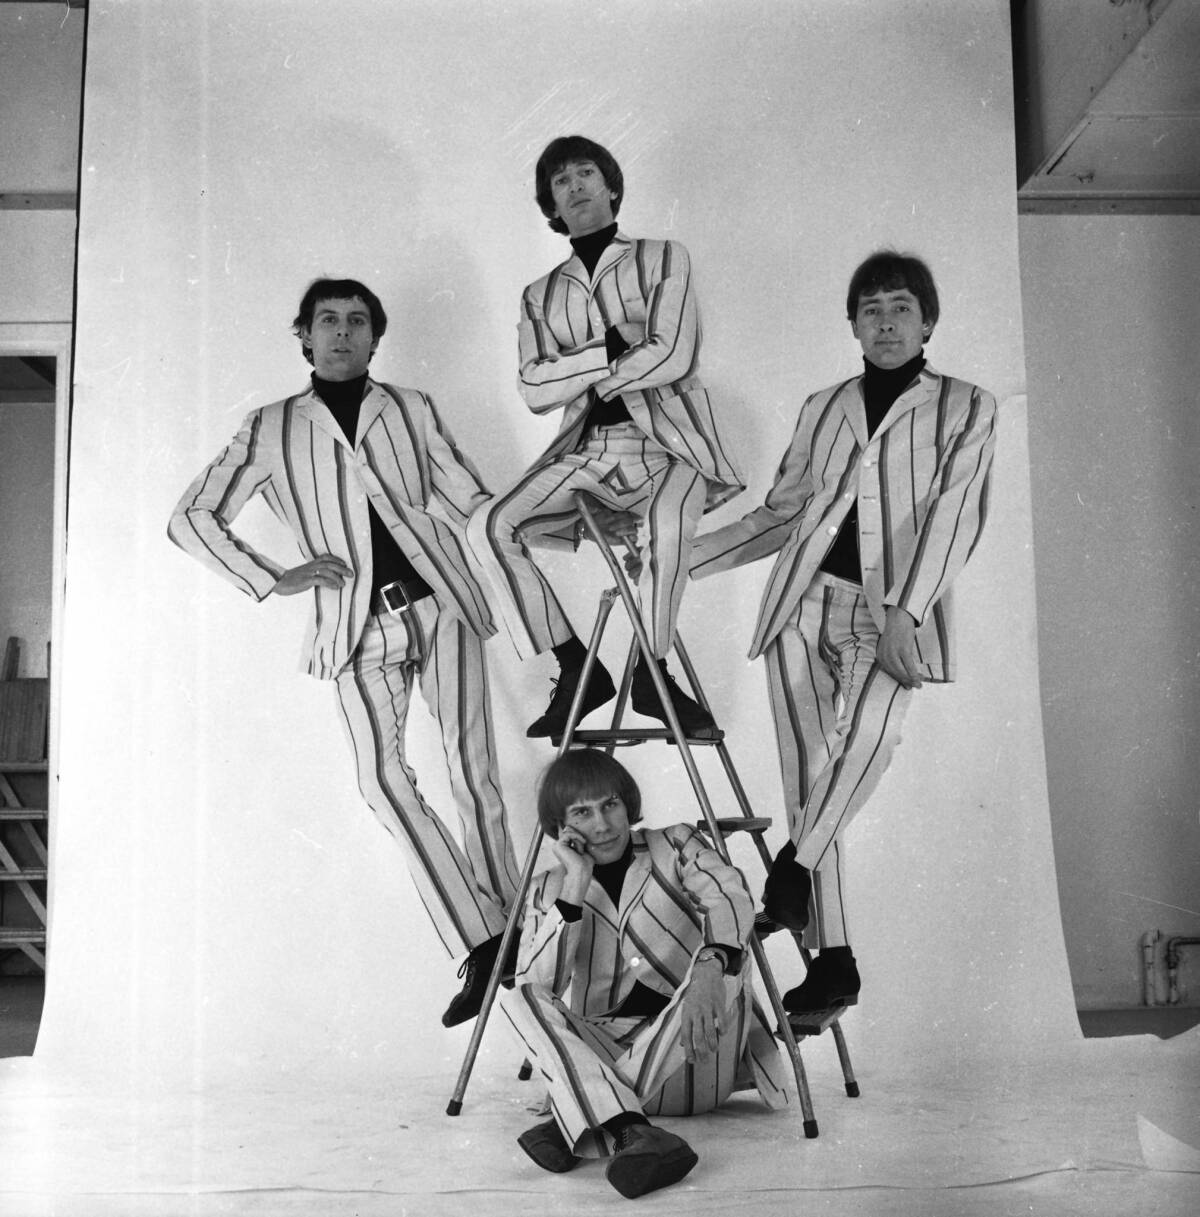 The British pop band the Troggs was made up of, clockwise from right, Reg Presley, Chris Britton, Peter Staples and Ronnie Bond.